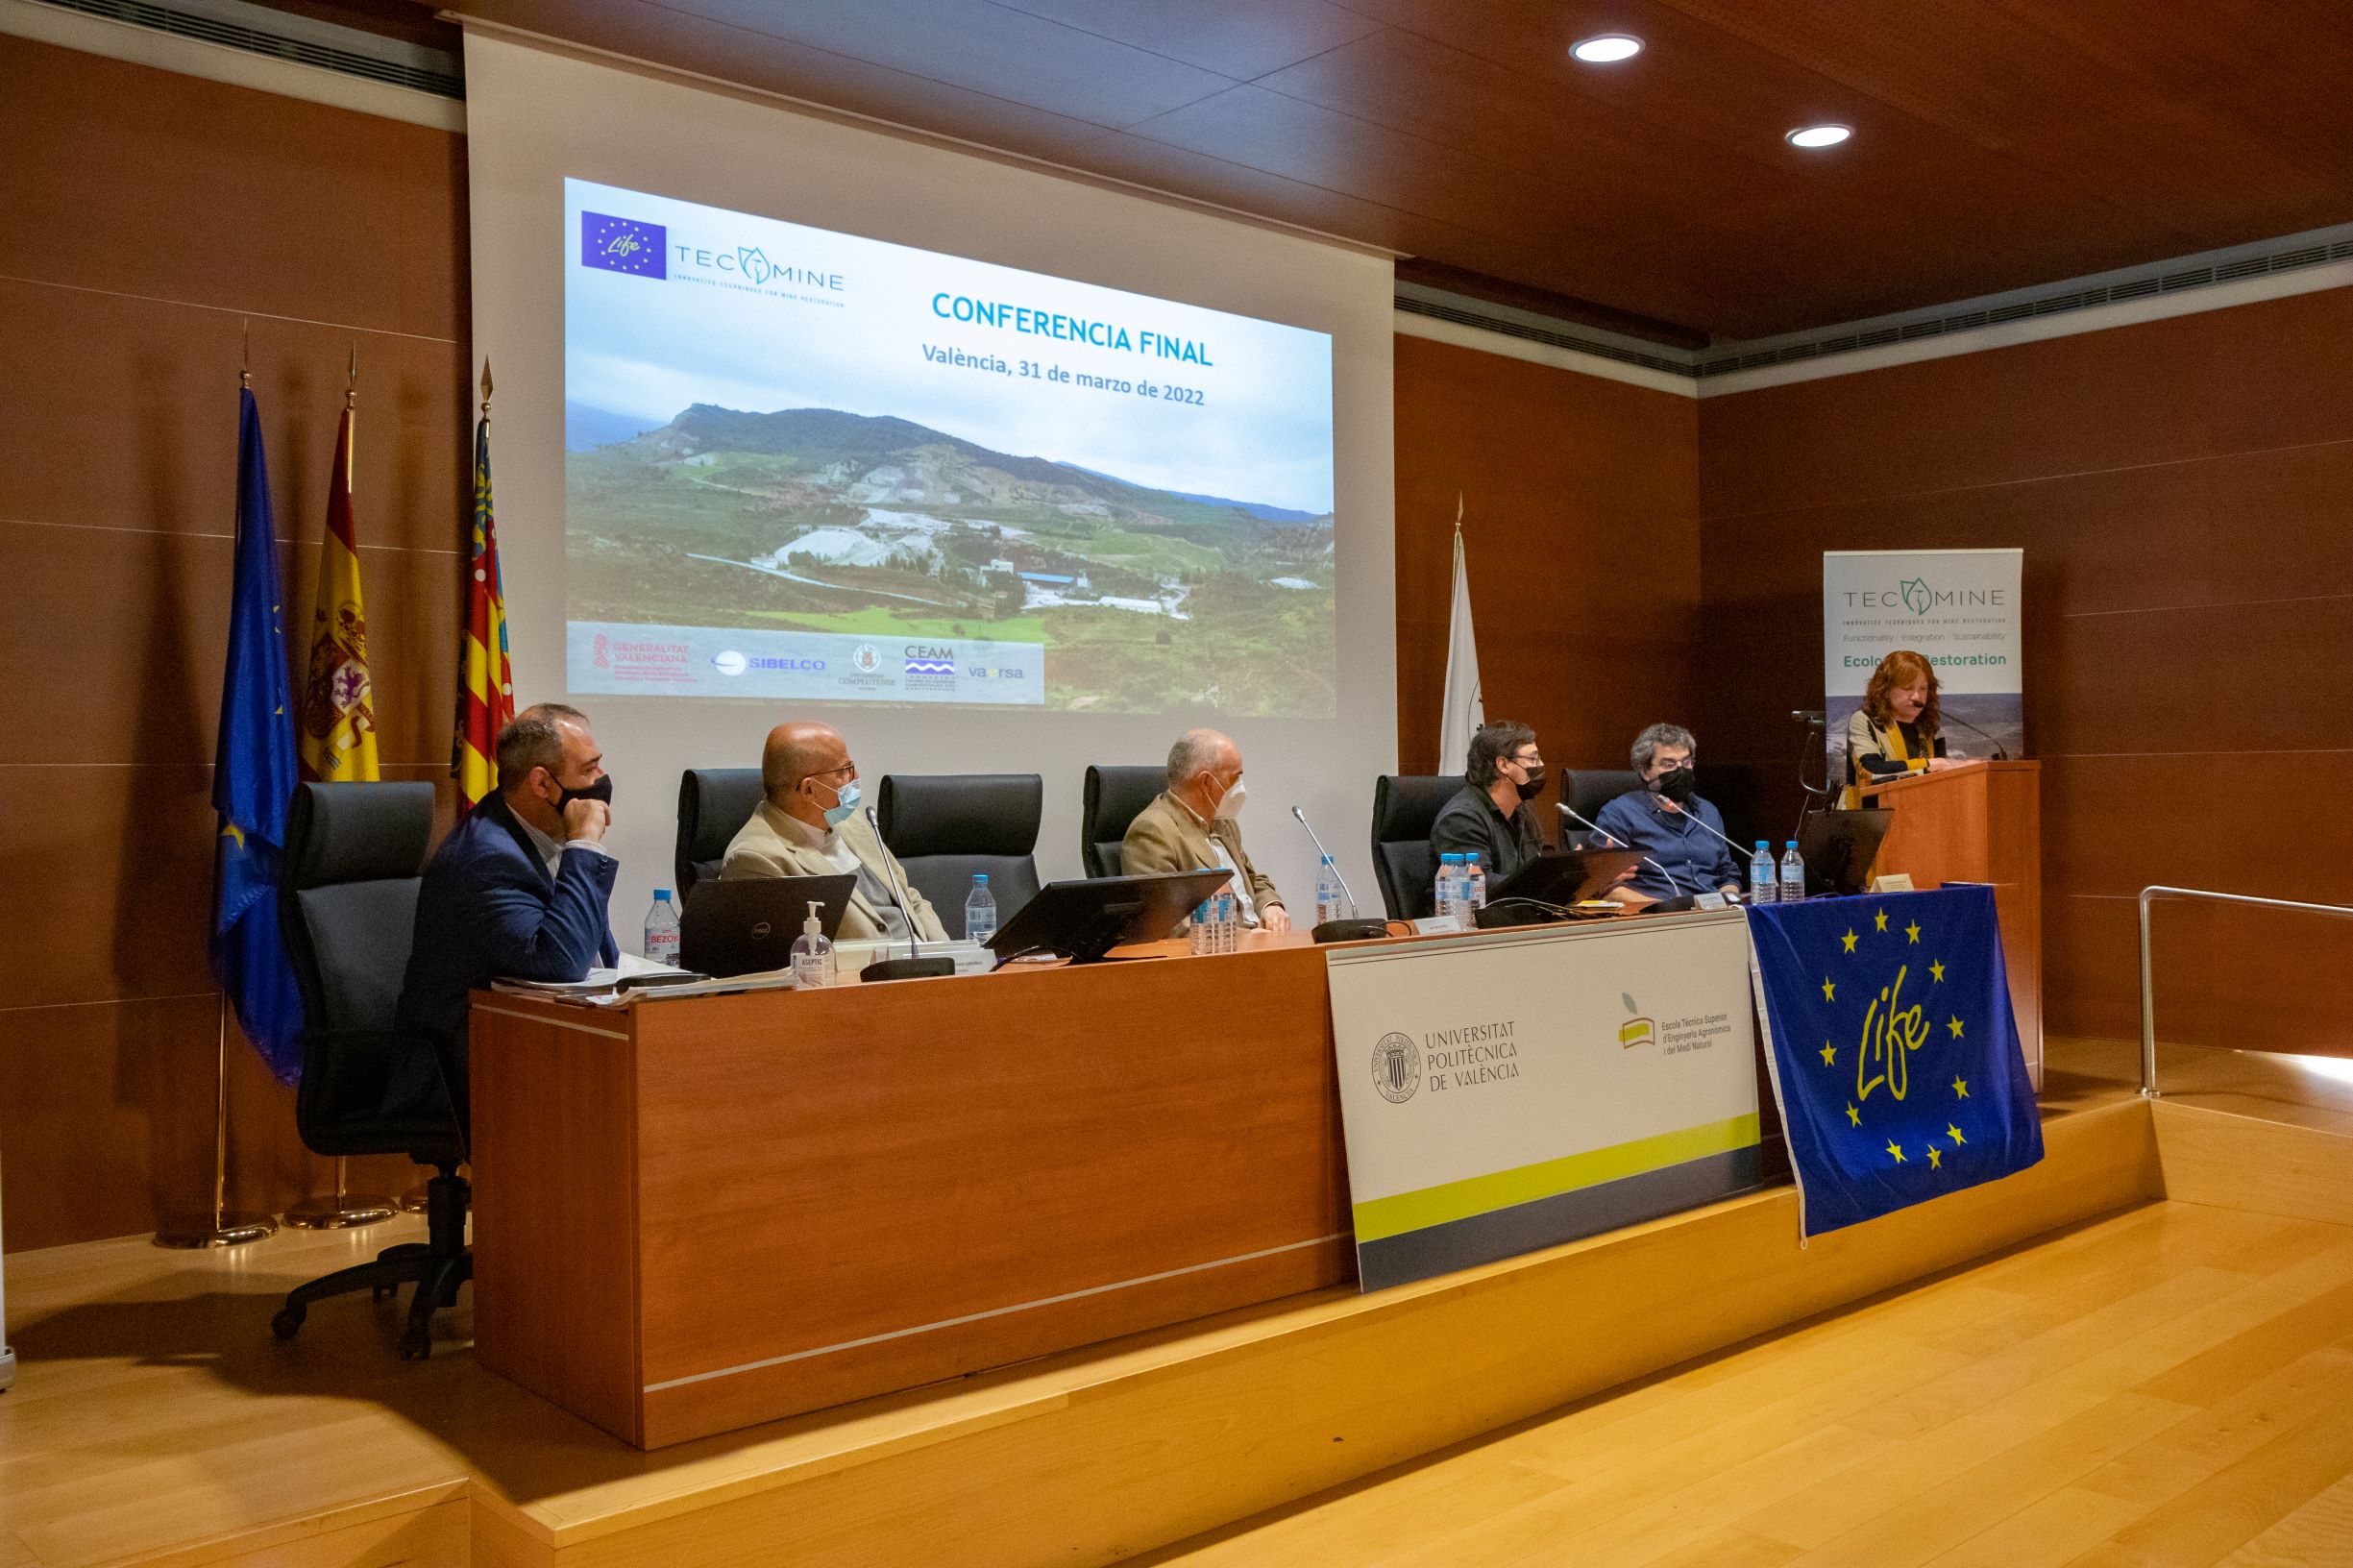 SUCCESS OF THE FINAL CONFERENCE OF THE LIFE TECMINE PROJECT "INNOVATIVE TECHNIQUES FOR MINE RESTORATION"